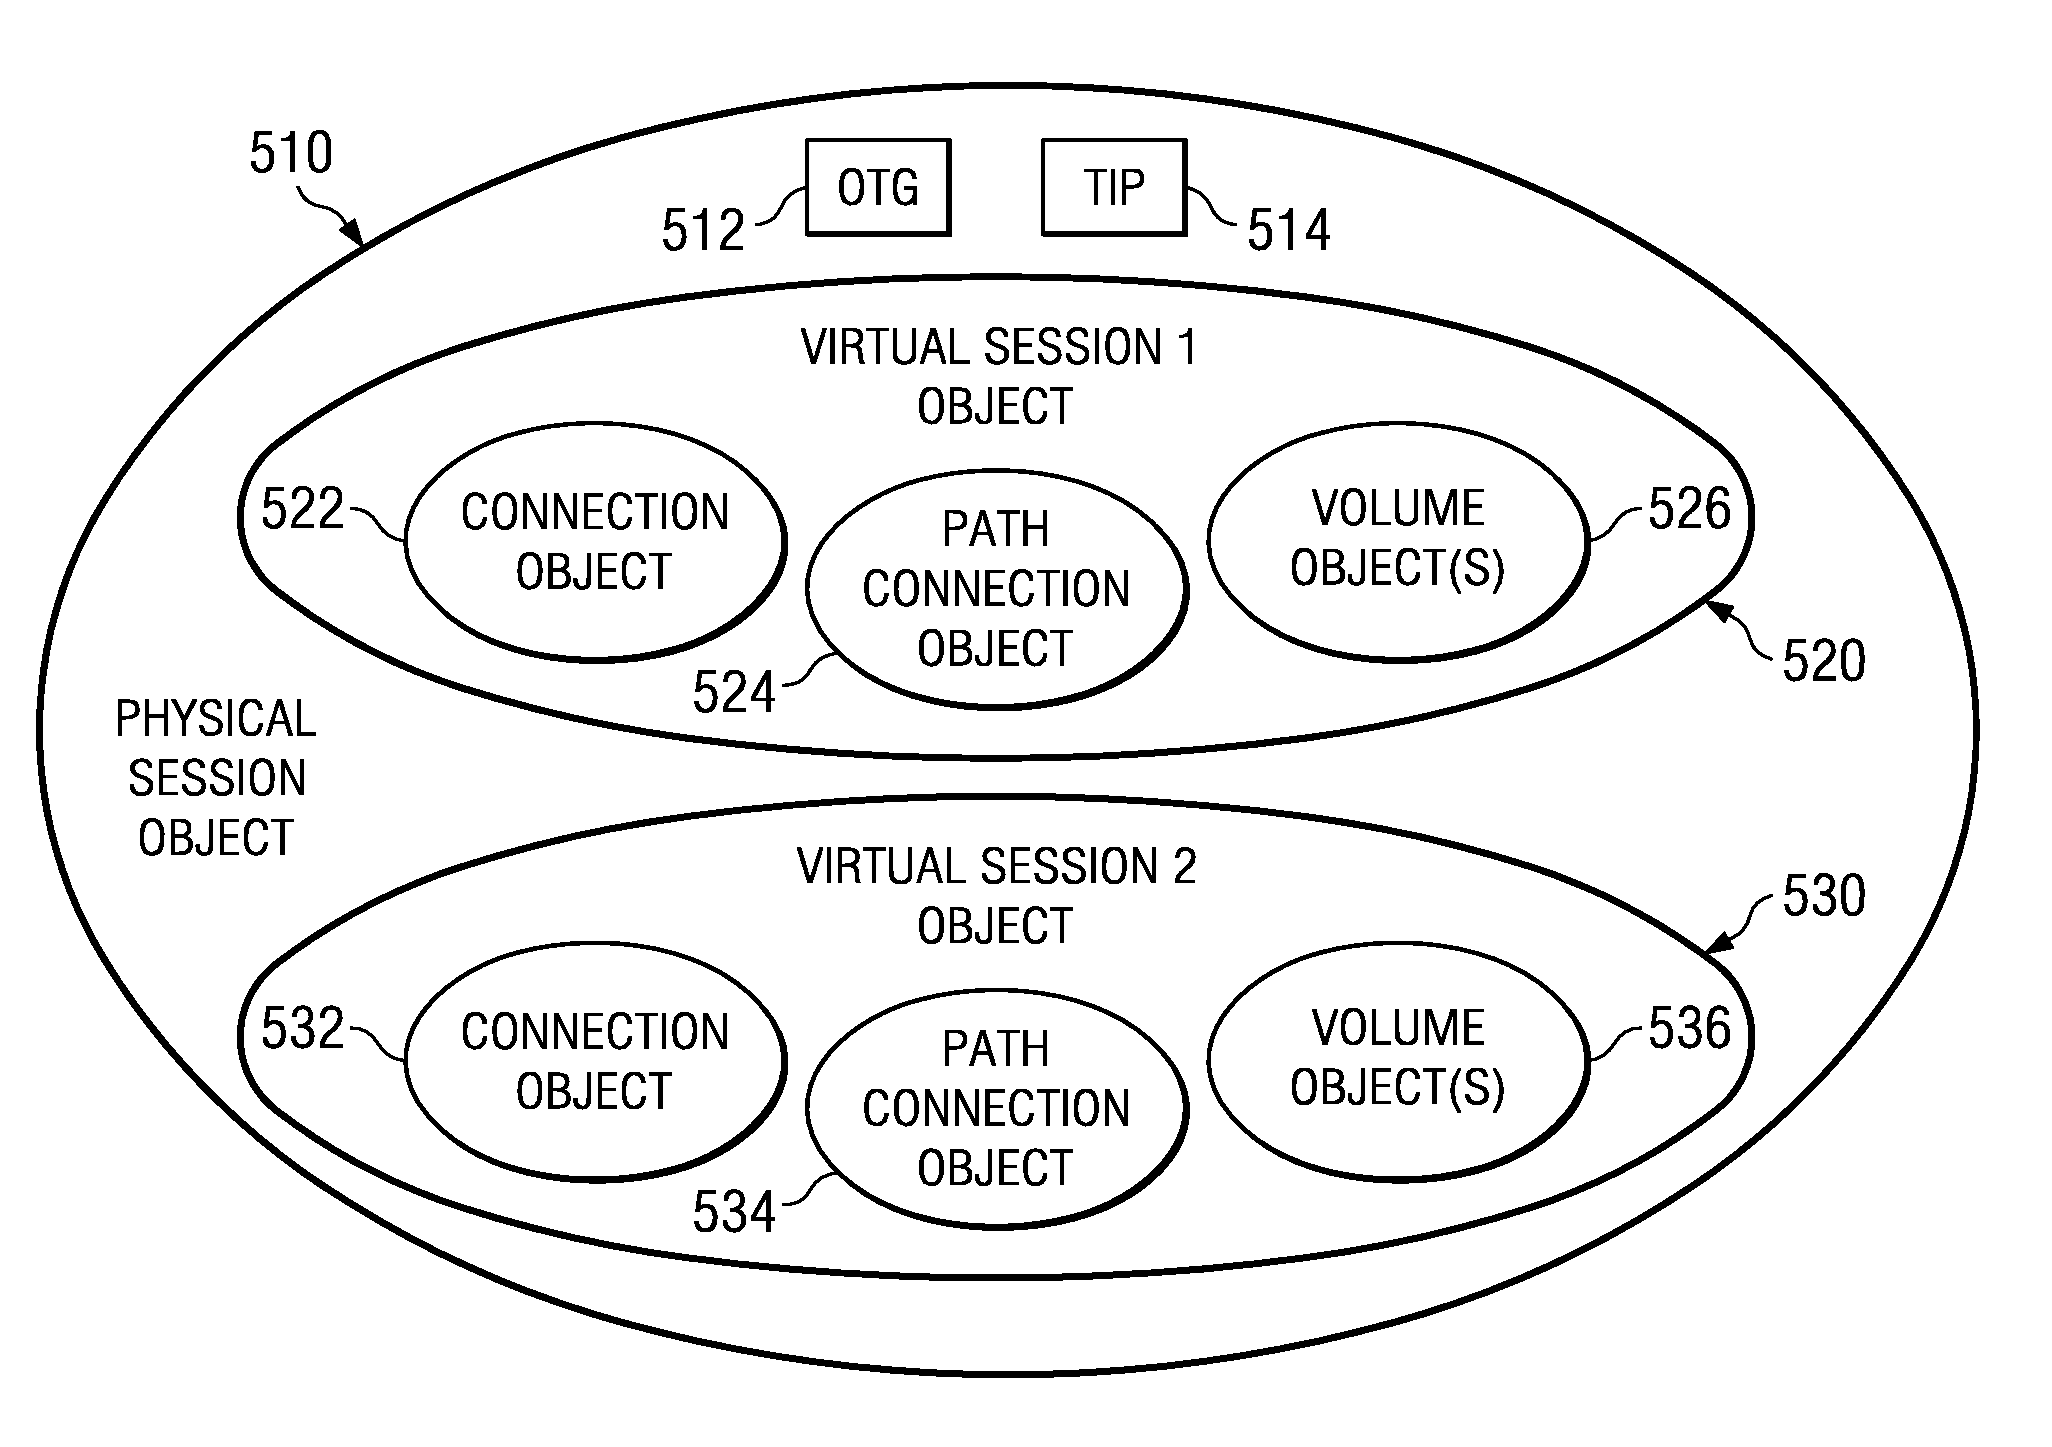 Creating and managing multiple virtualized remote mirroring session consistency groups